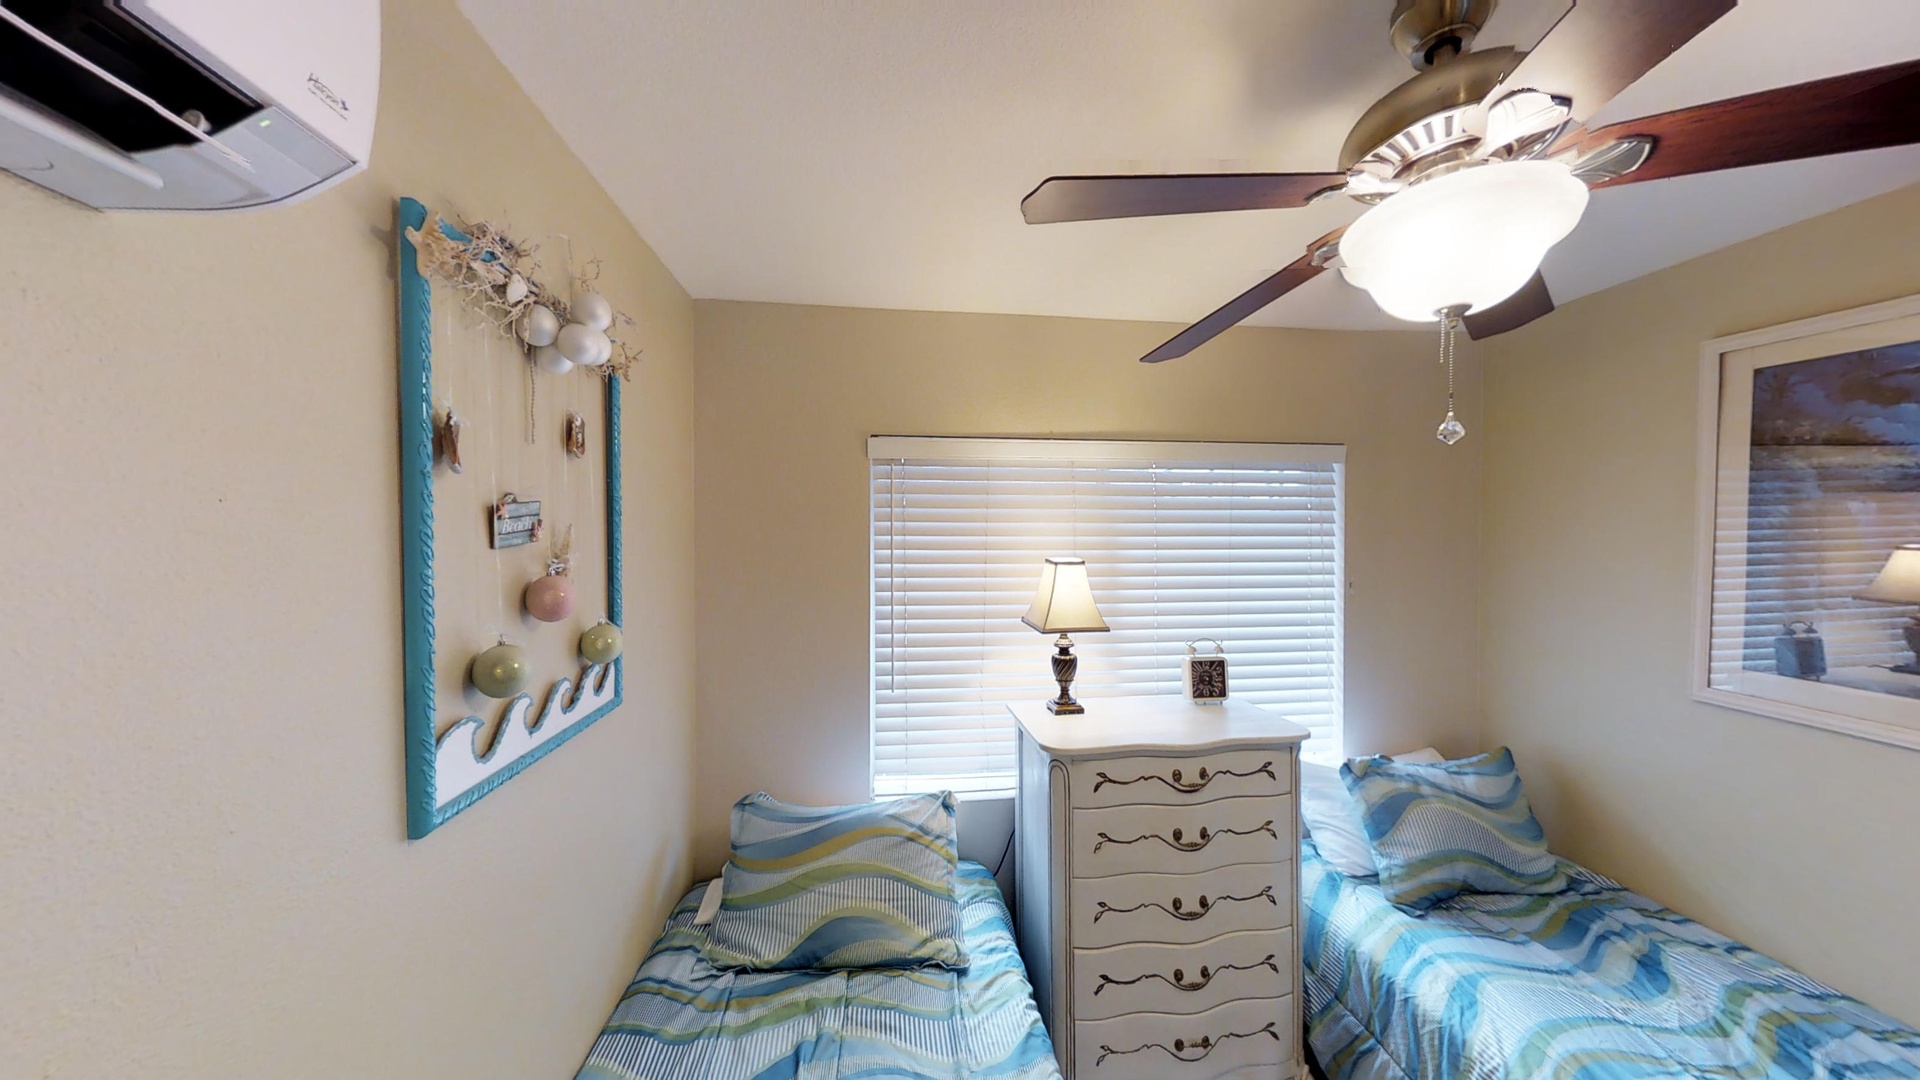 Kapolei Vacation Rentals, Fairways at Ko Olina 8G - The third guest bedroom has twin beds and a tall dresser with antique pearl detail.